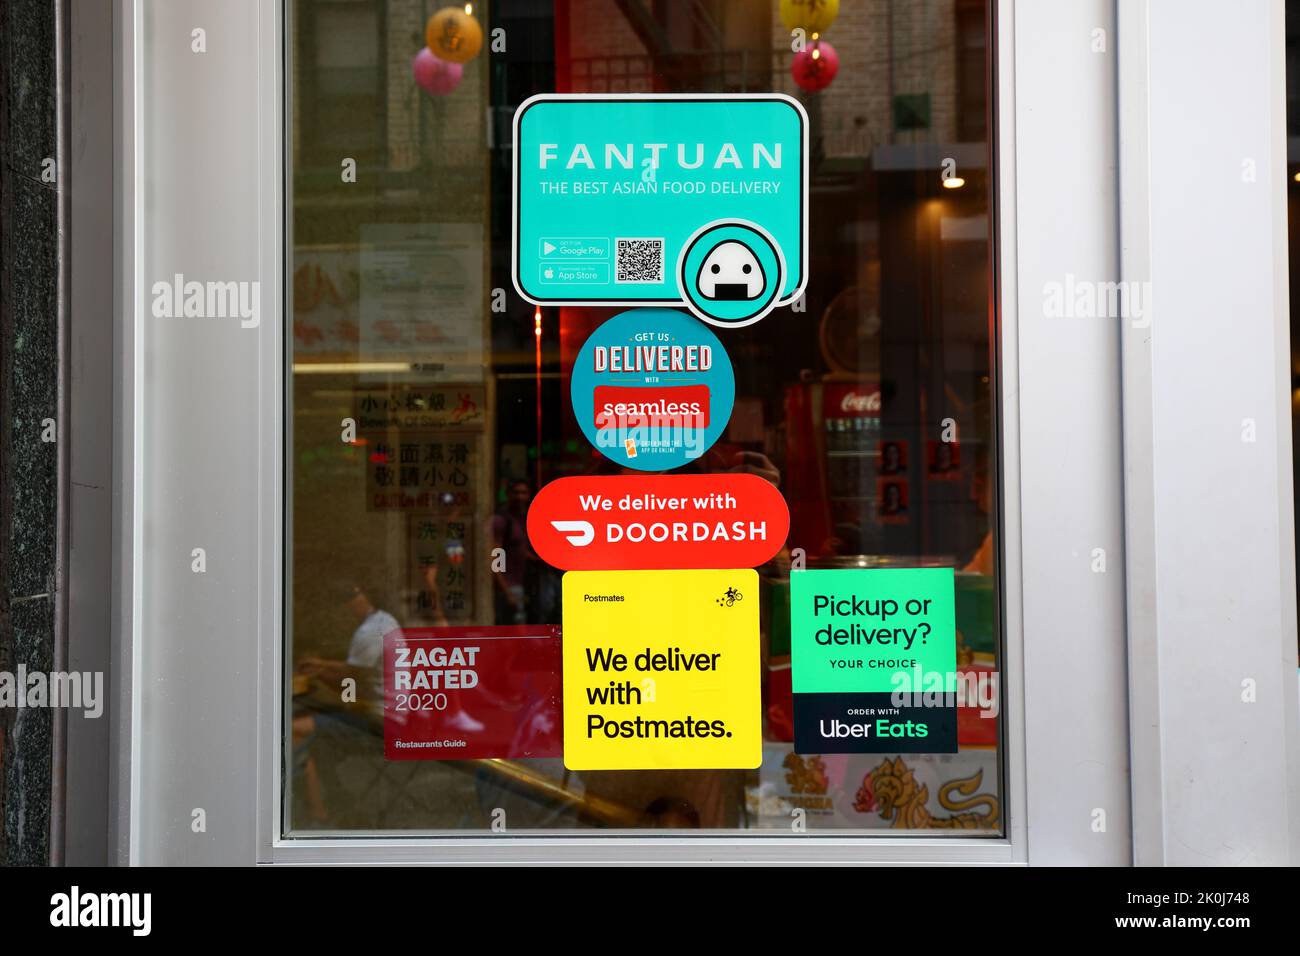 Fantuan Delivery, Seamless, Doordash, Postmates, and Uber Eats food delivery service app stickers on a door to a restaurant in Chinatown, New York. Stock Photo